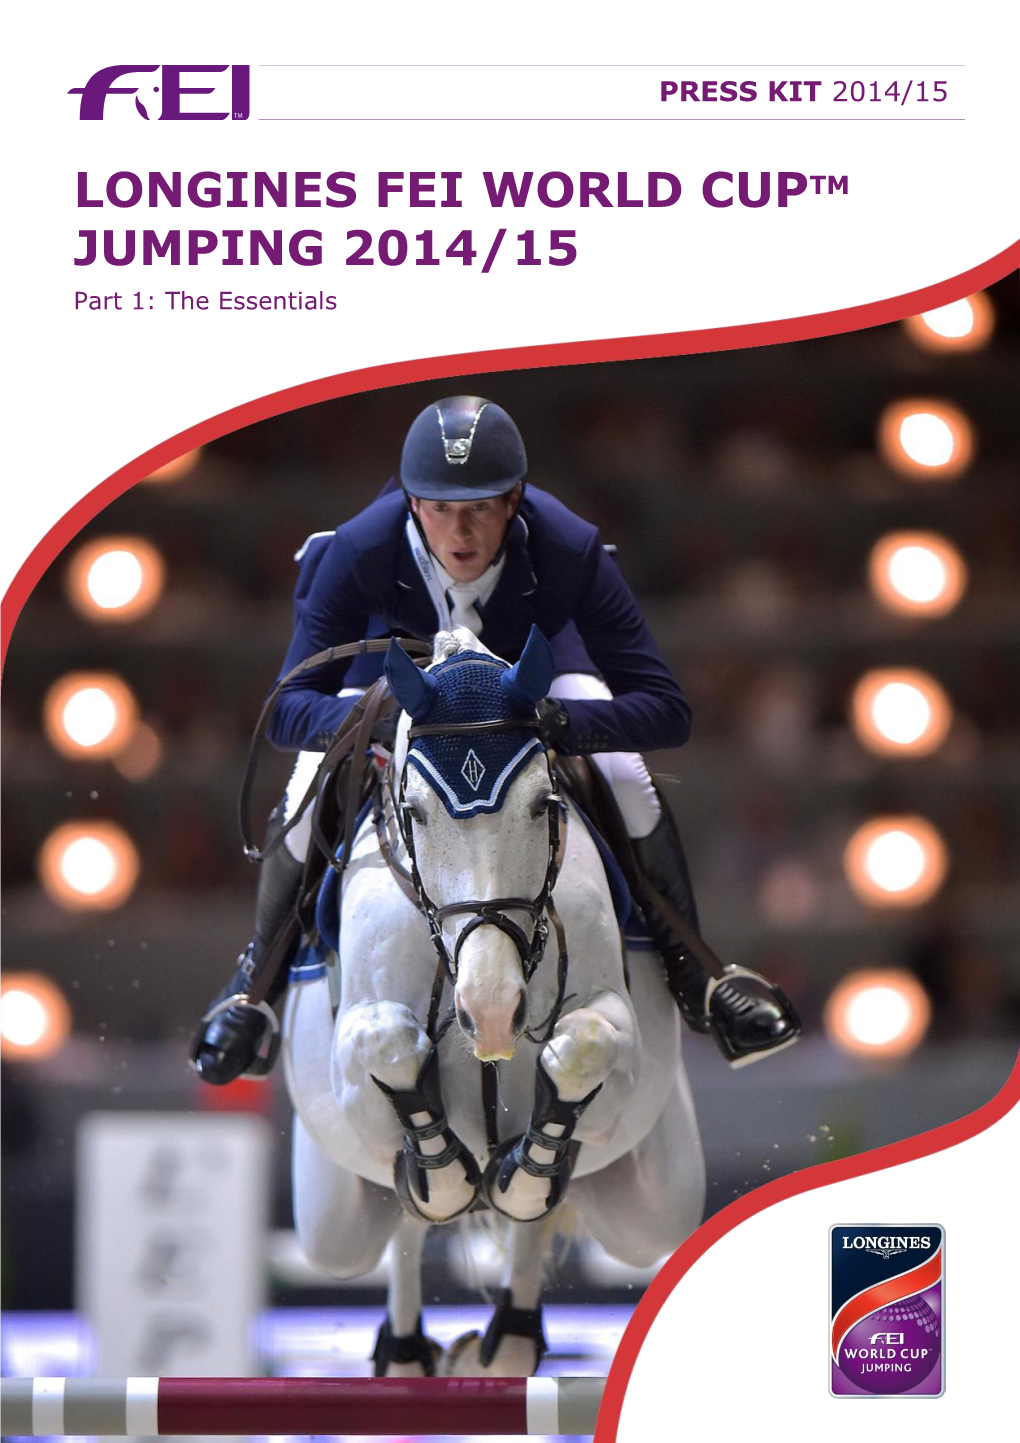 LONGINES FEI WORLD CUPTM JUMPING 2014/15 Part 1: the Essentials